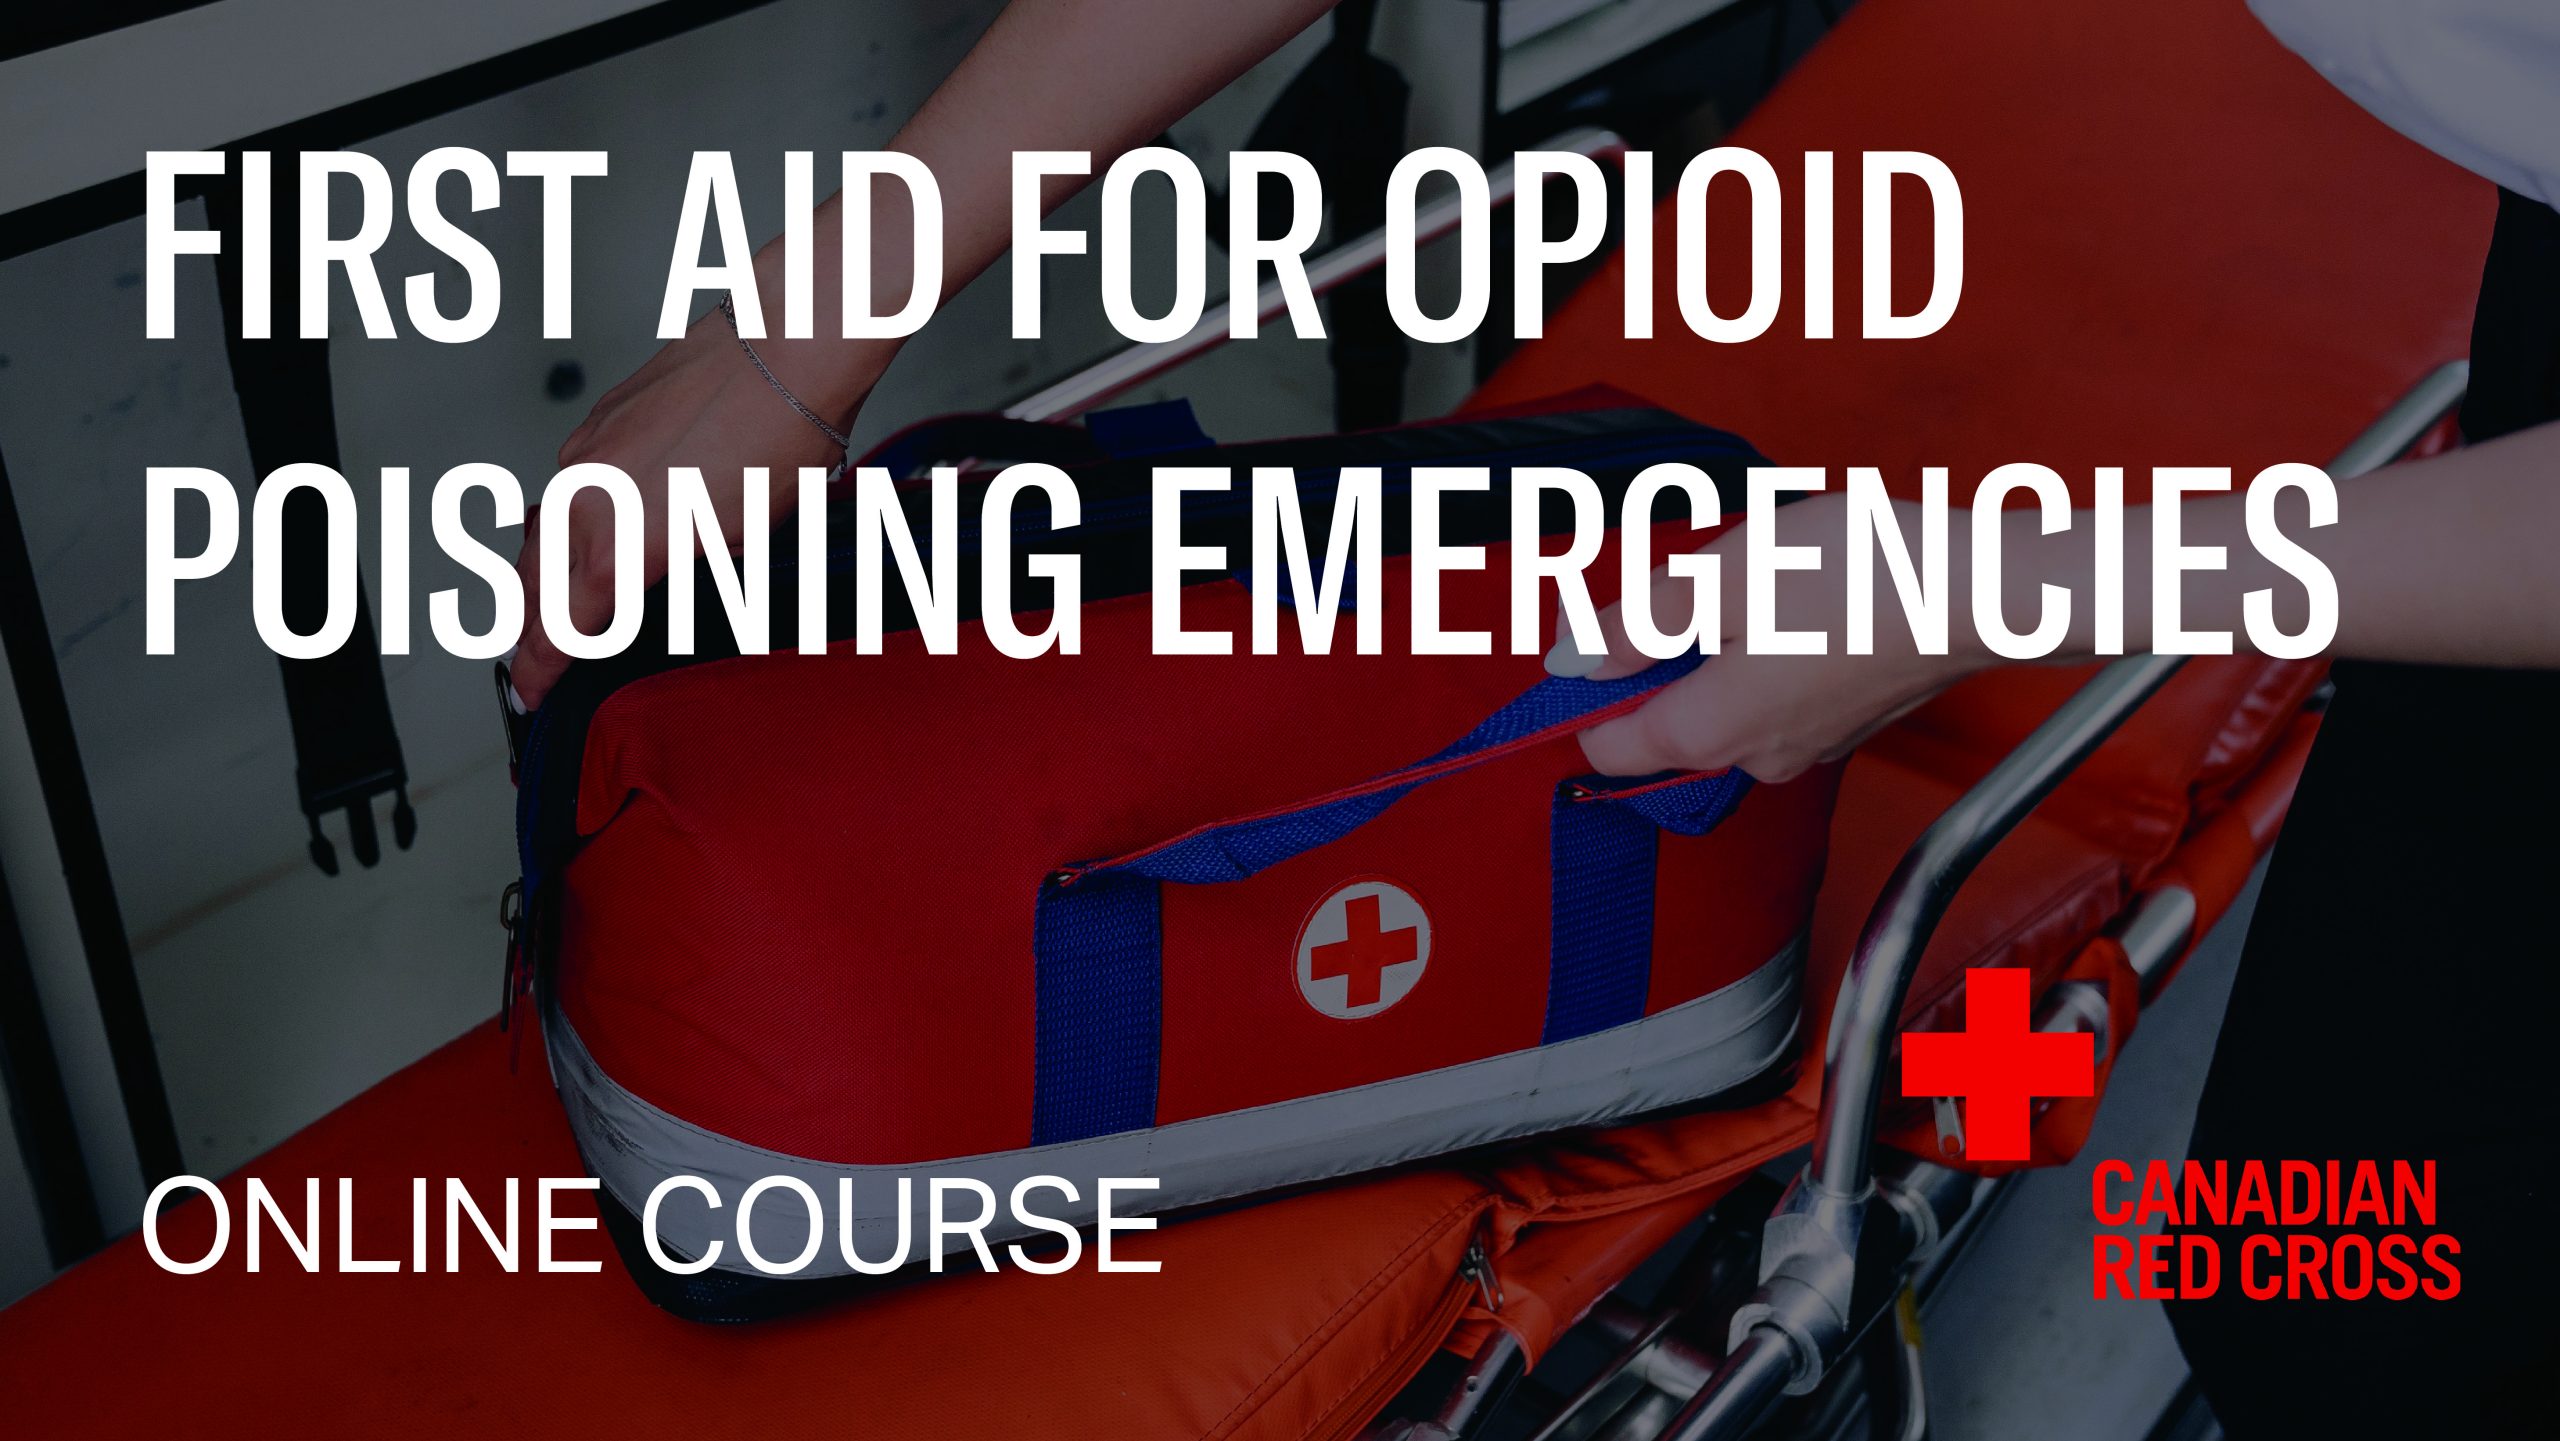 First Aid for Opioid Poisoning Emergencies